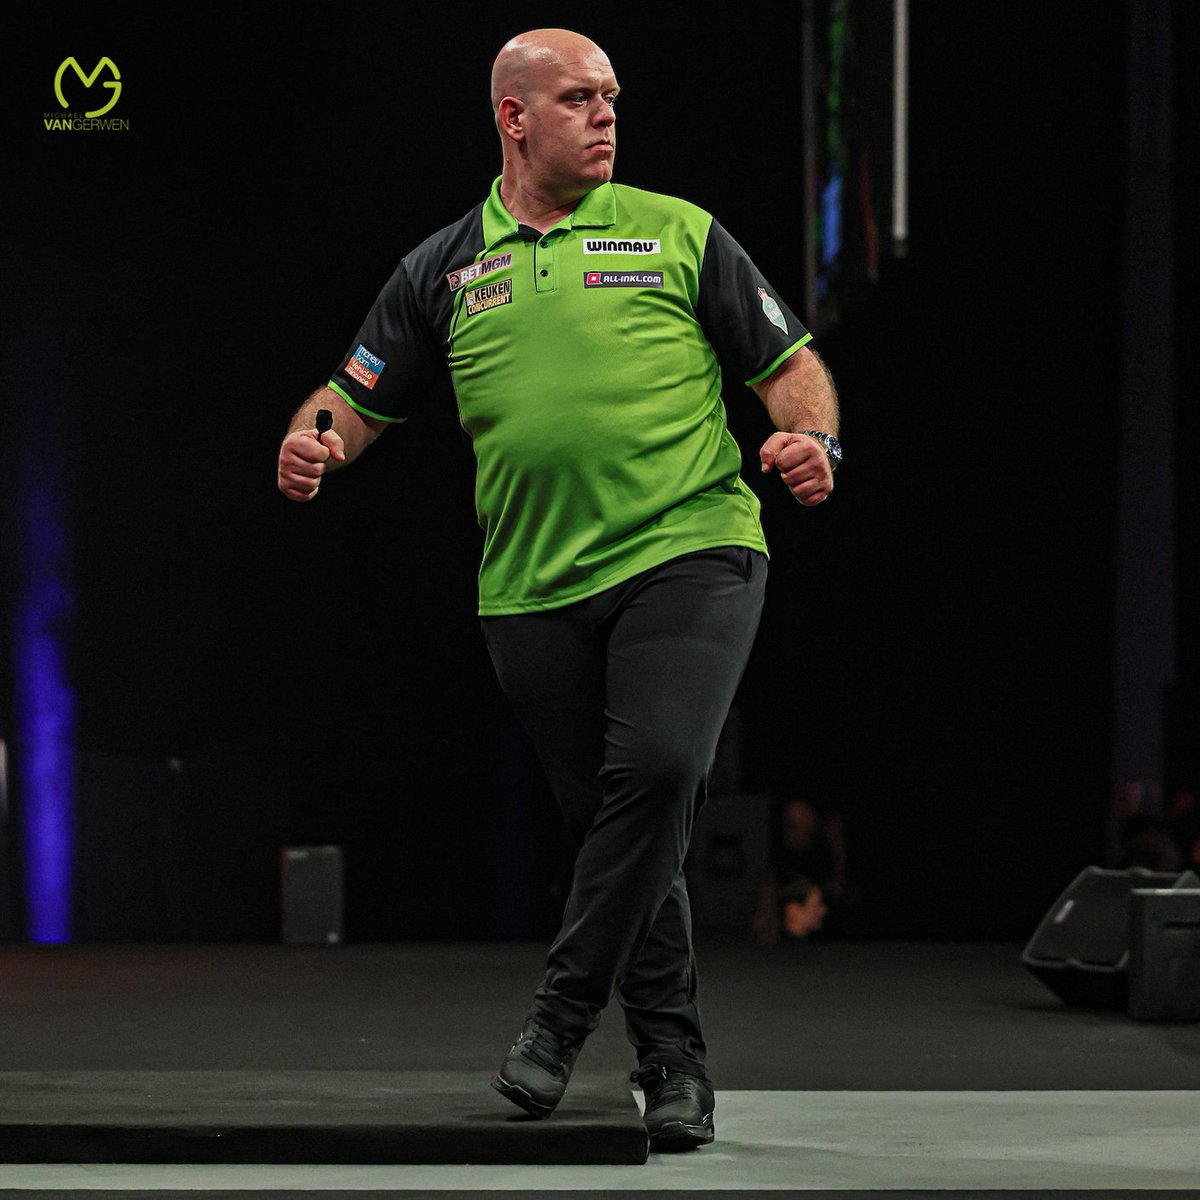 𝗤𝗨𝗔𝗟𝗜𝗙𝗜𝗘𝗗! 🎯 That was a close call with a decider and a missed match dart against Luke Humphries in the final in Leeds! Unfortunately, I couldn't win the final, but I'm happy to have qualified for the playoffs. 💚